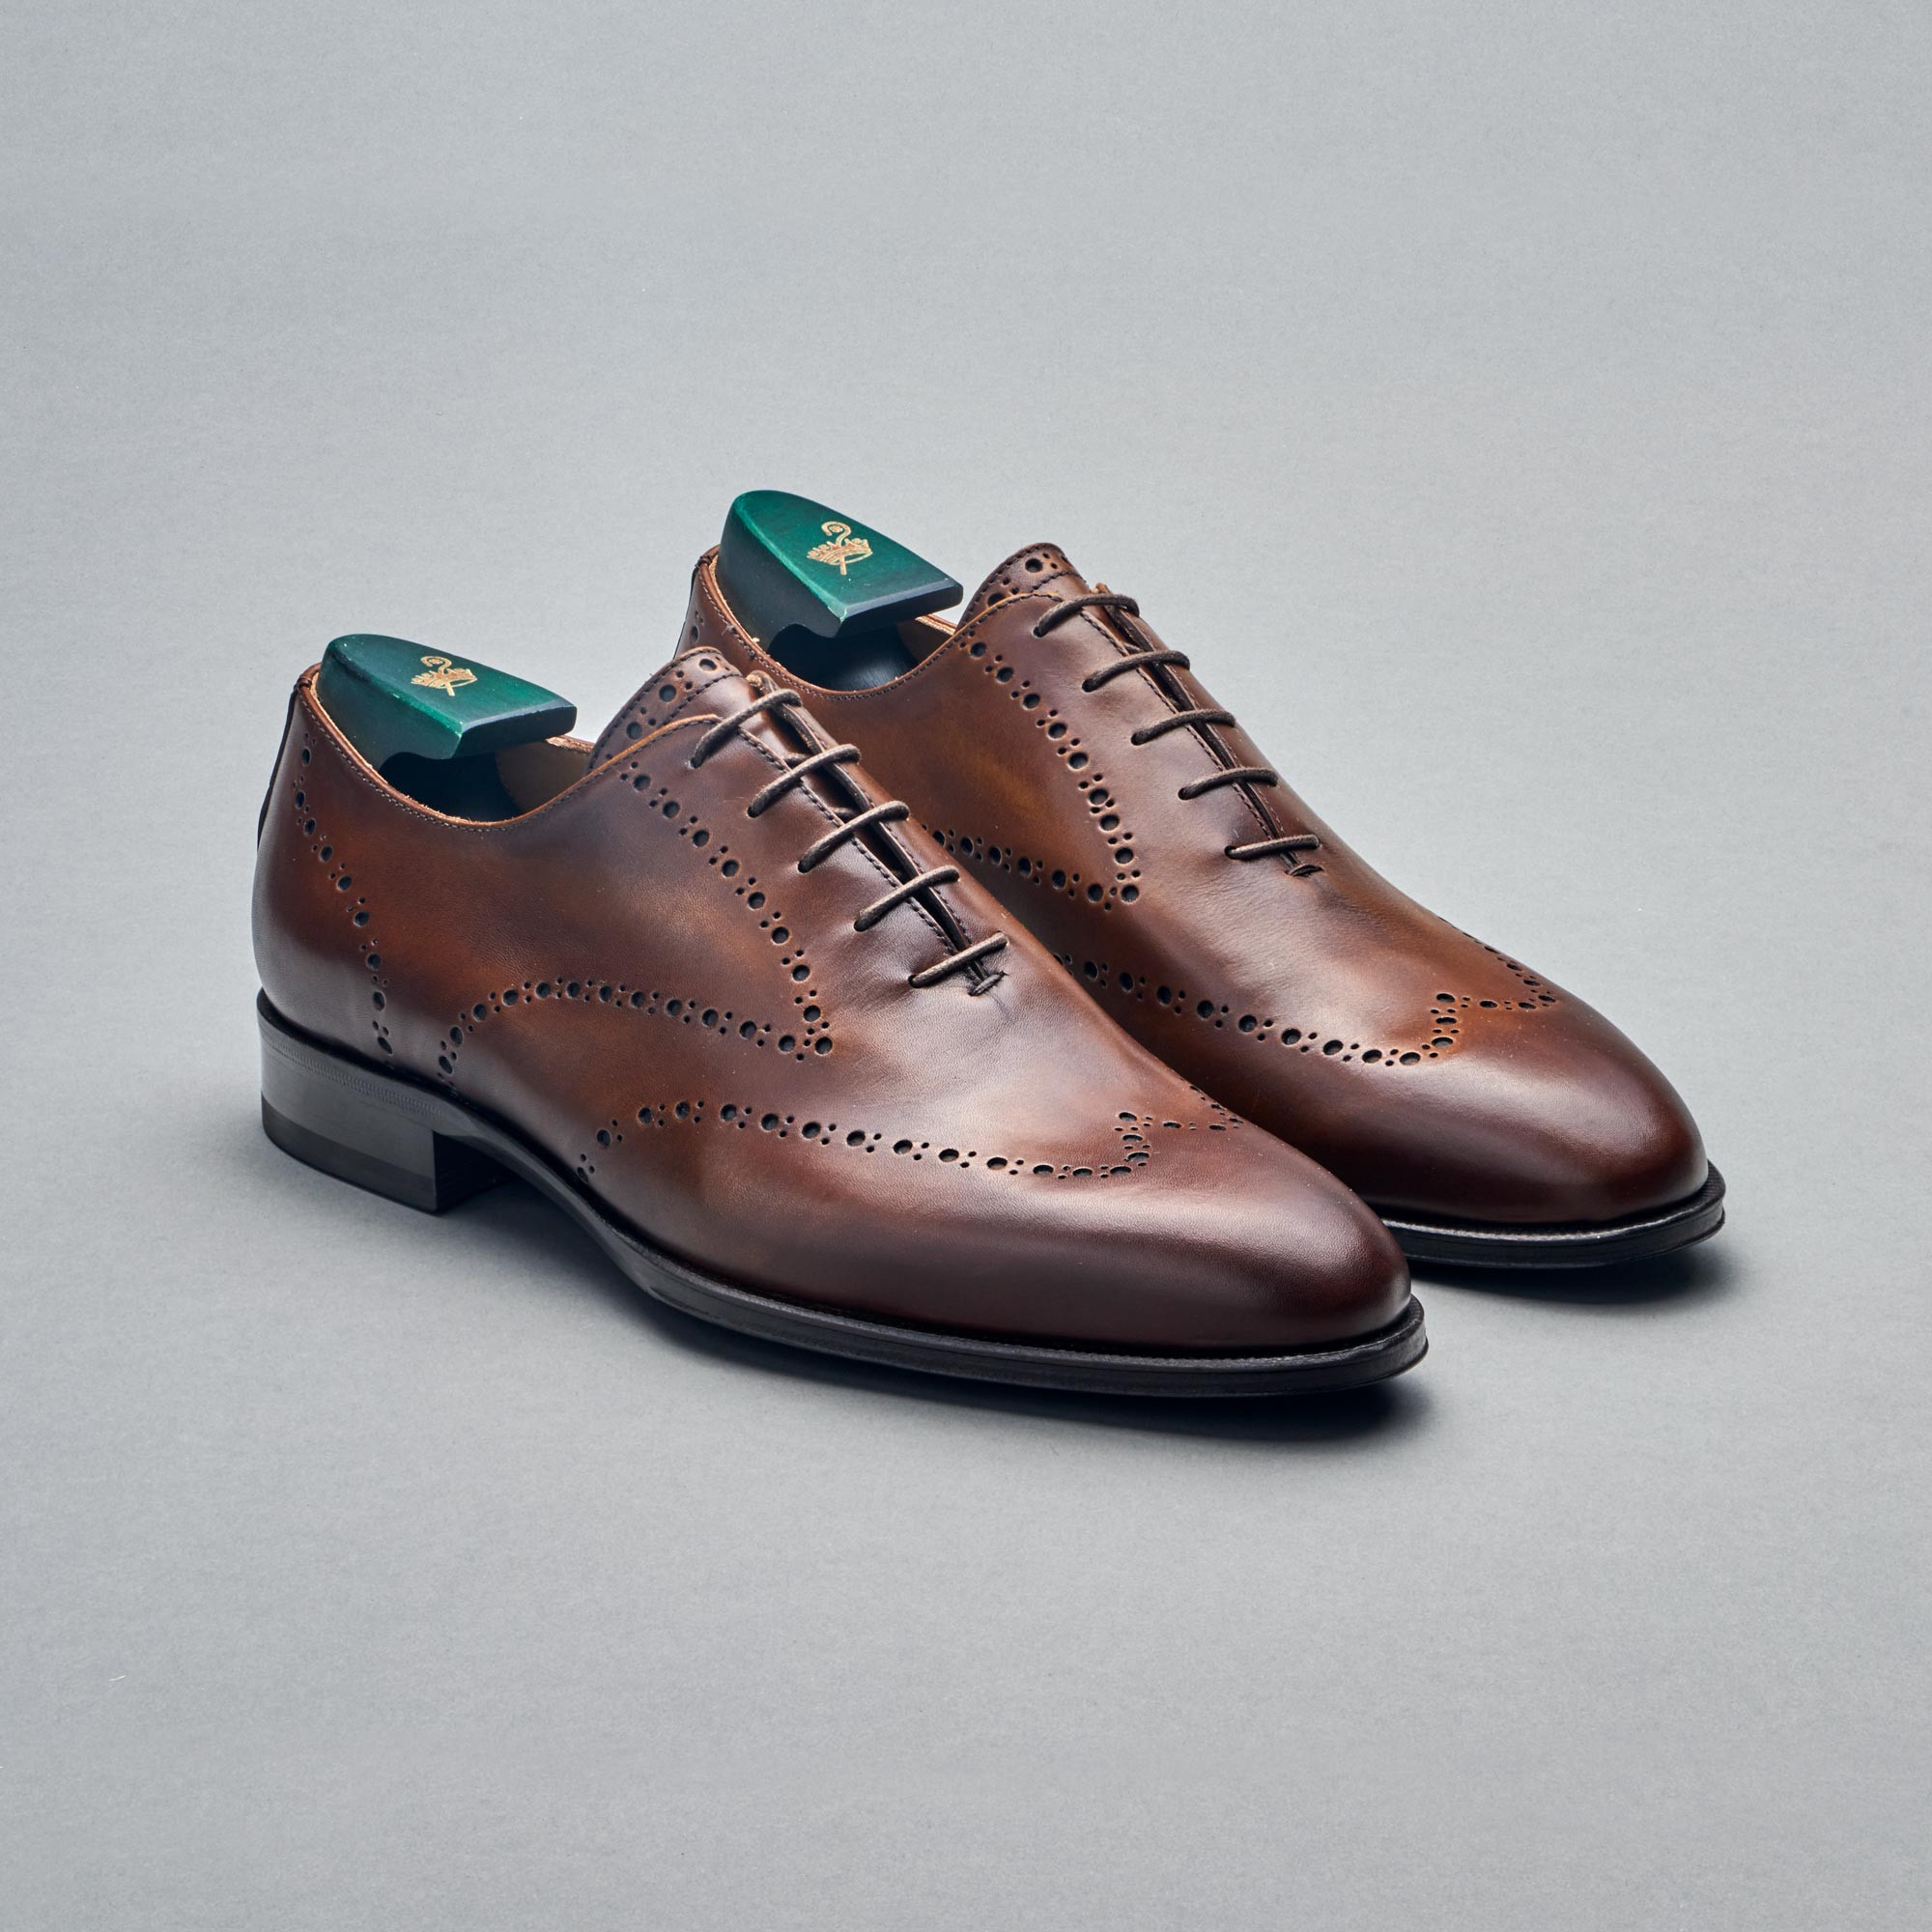 Augustus Oxford in Whiskey Brown